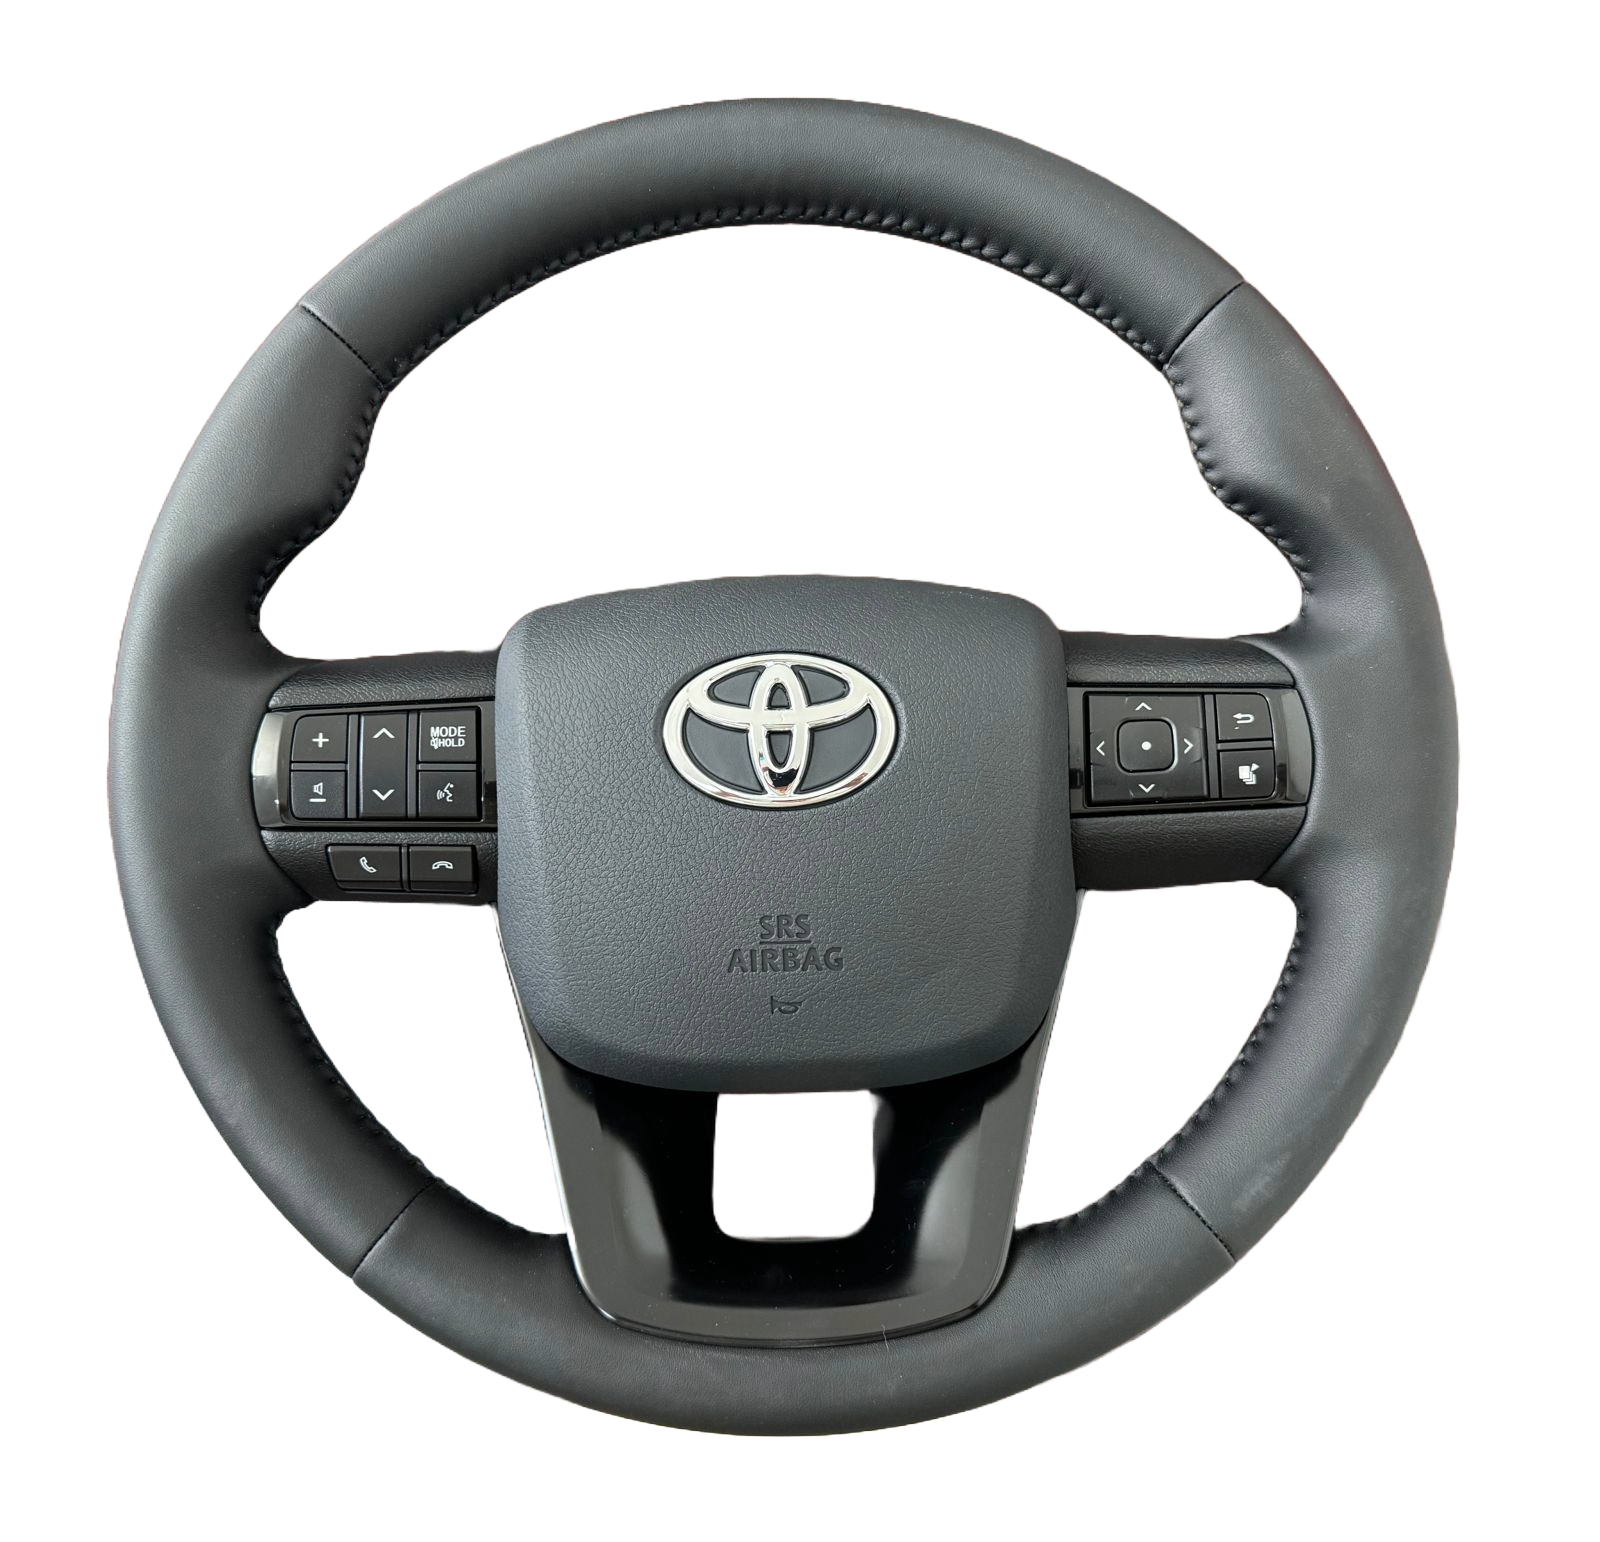 Full Leather Hilux Steering Wheel for Toyota 70 Series Land Cruiser